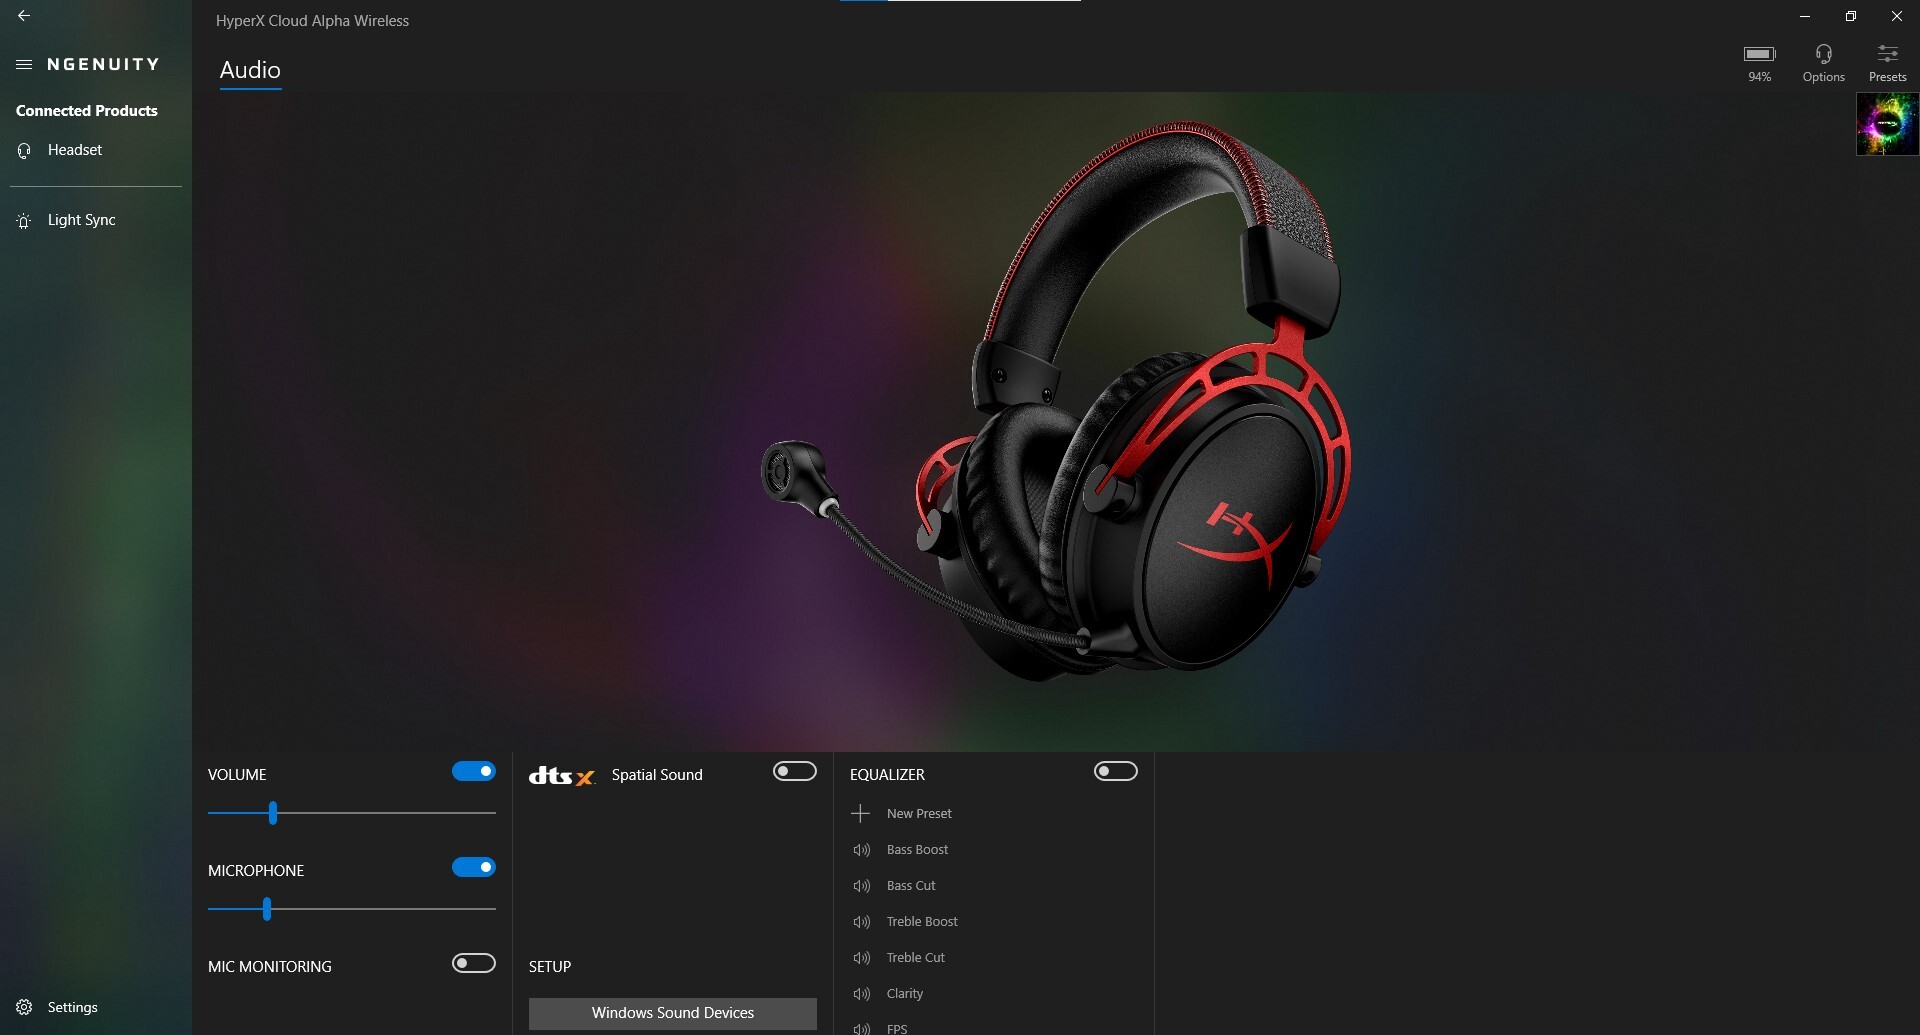 A screenshot for the HyperX NGenuity software.